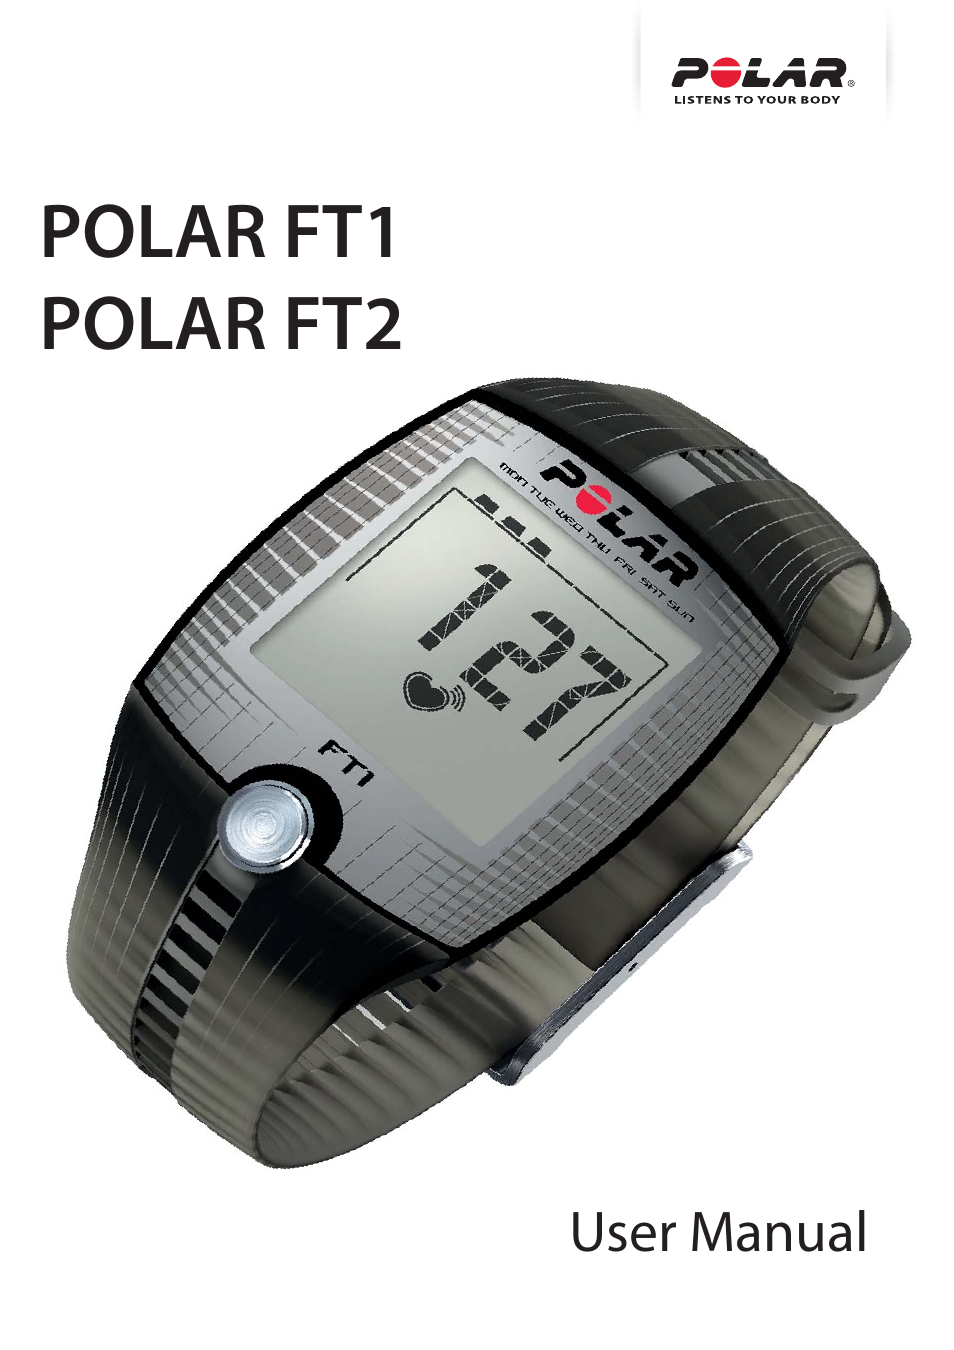 POLAR FT1 User Manual | 18 pages | Also for: FT2